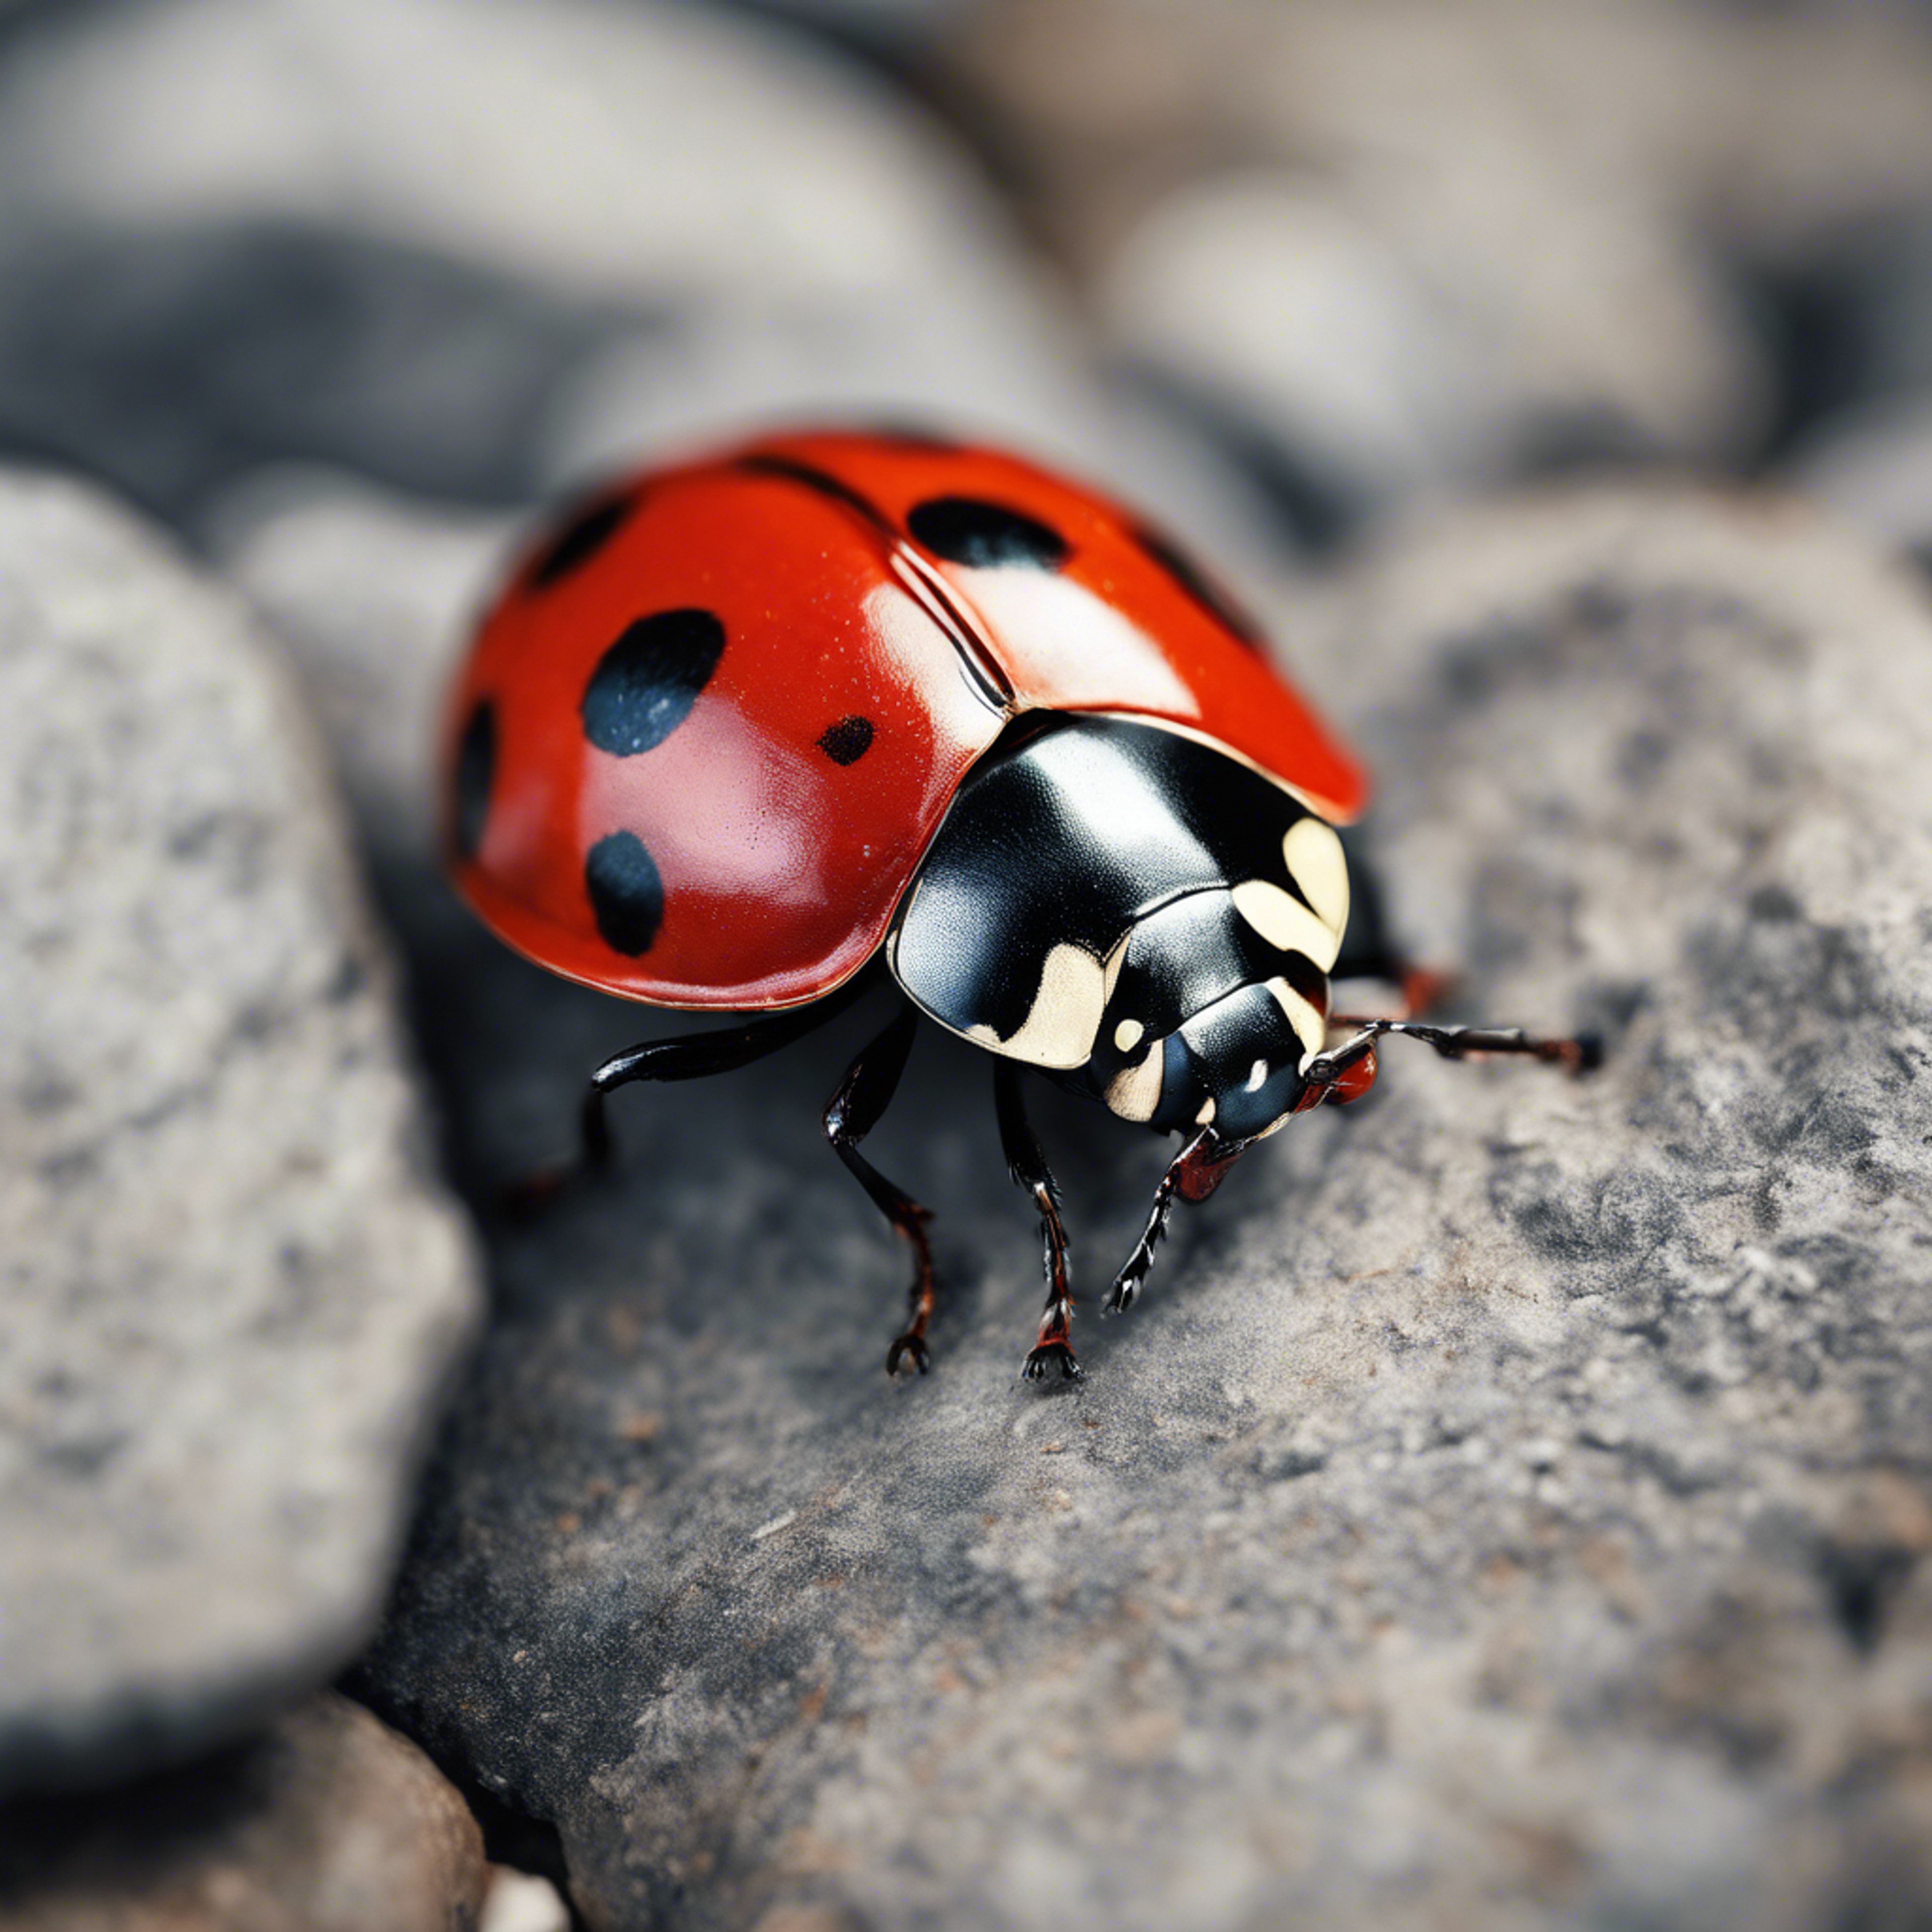 A fearless ladybug with bright red wings crawling over a dull, grey stone. Fondo de pantalla[cb02e673ce6f479eab40]